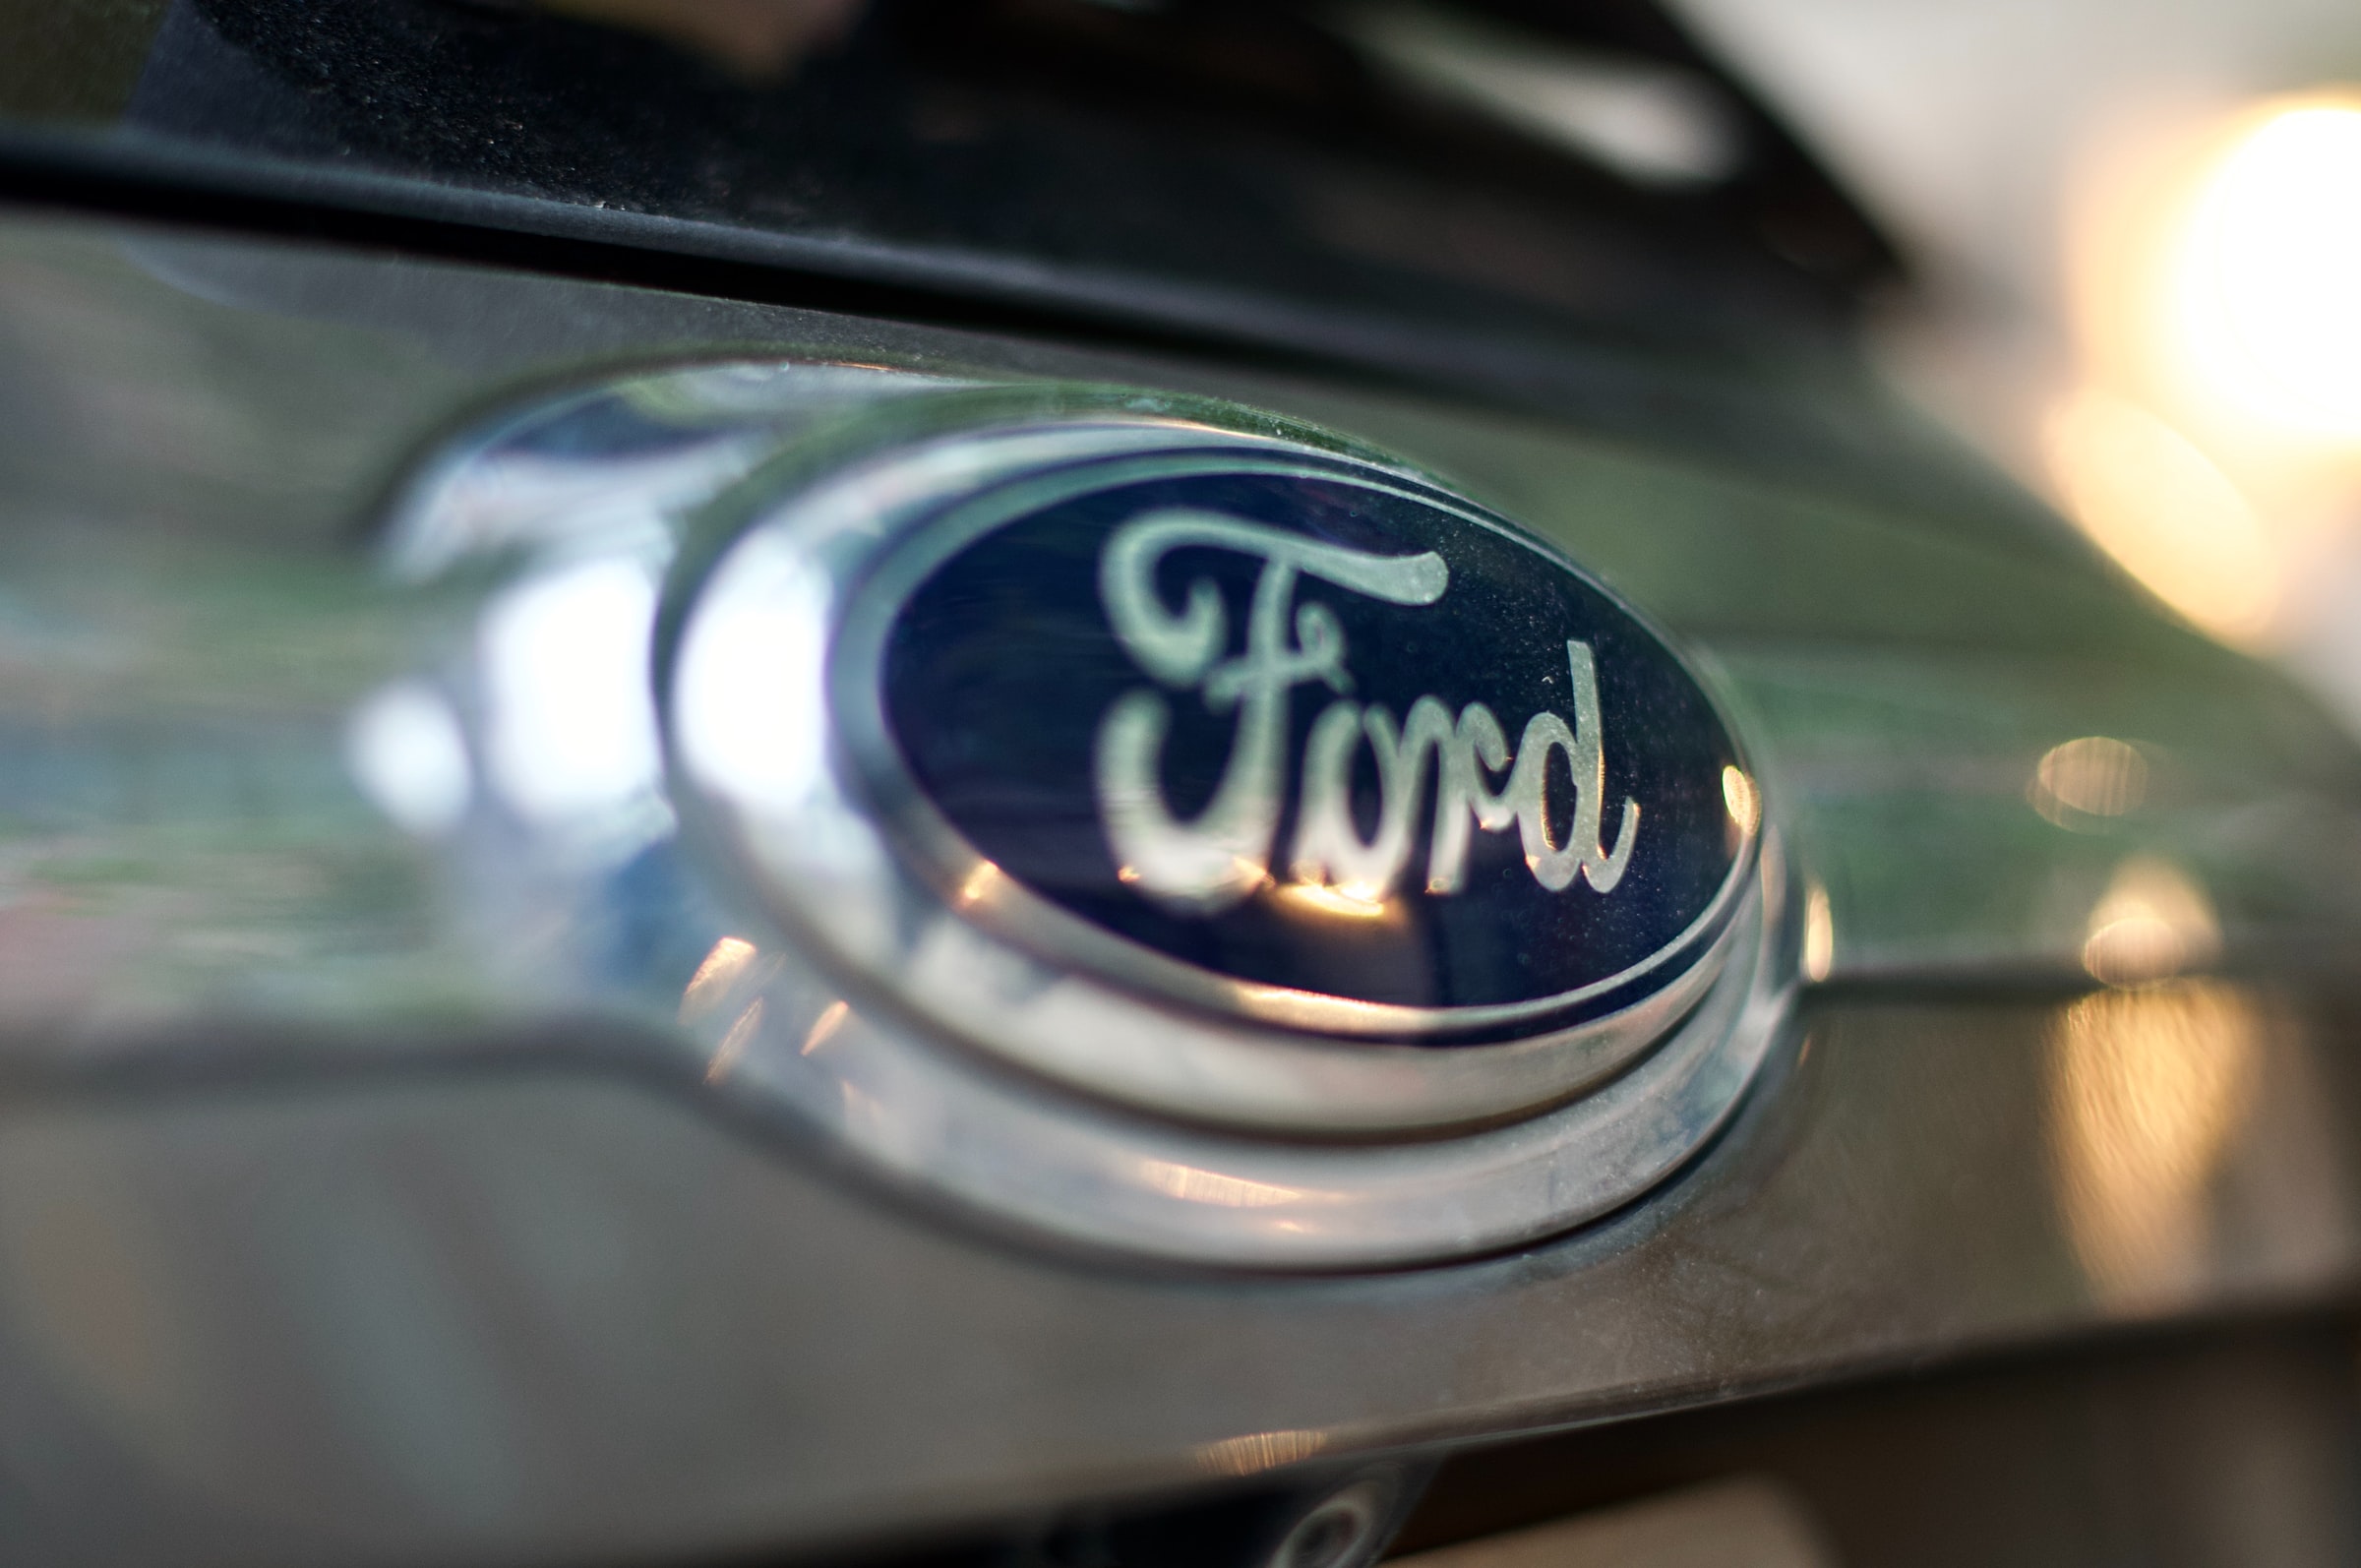 Ford Strikes At Tesla, Stating Their Self-Driving Feature Is “Vaporware”